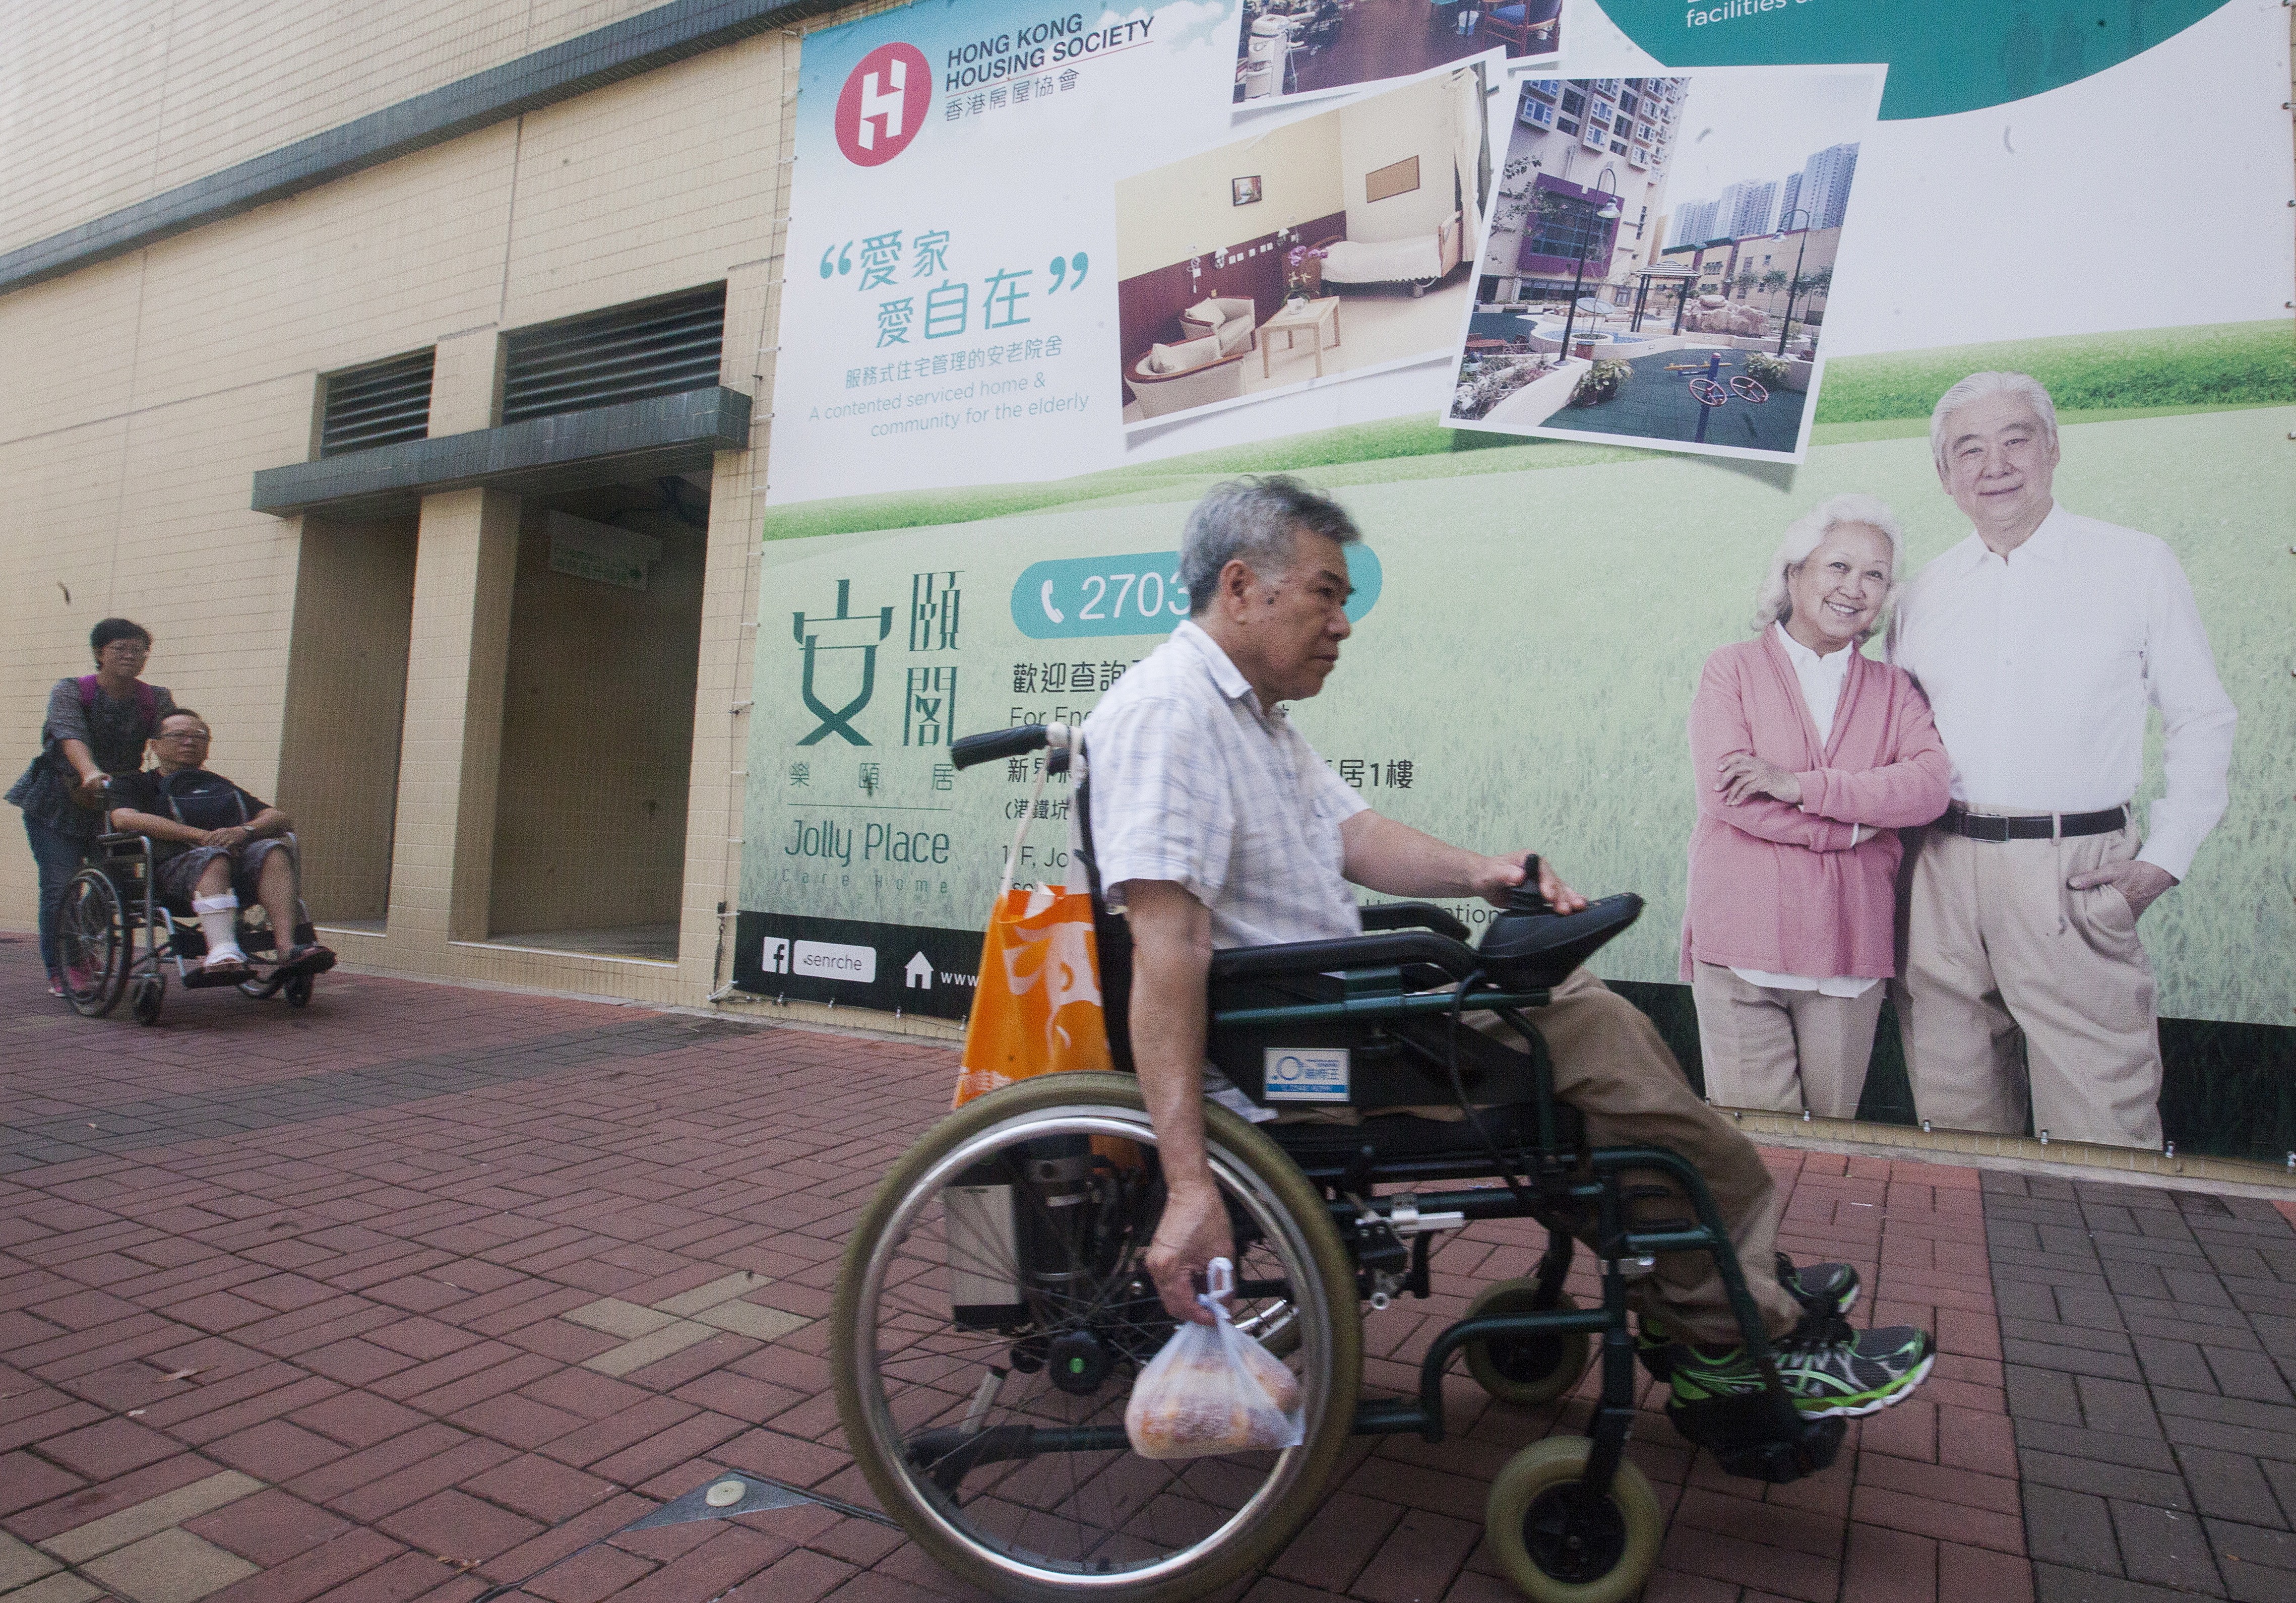 An elderly person passes a billboard advert for a care home near a public housing estate in Tseung Kwan O, on July 6. Hong Kong is facing a “silver tsunami” as the population ages. Photo: EPA-EFE